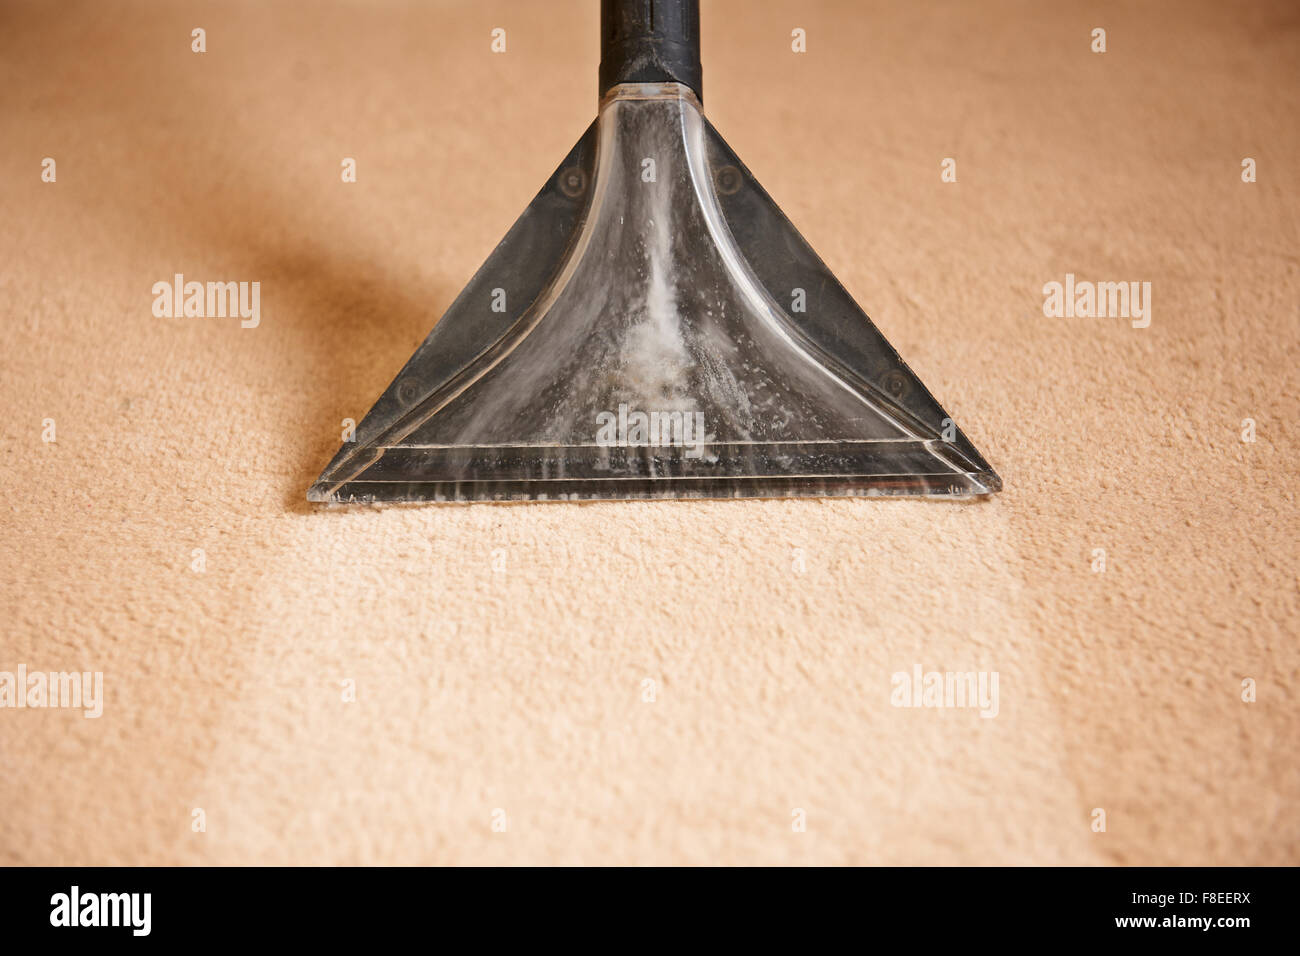 Equipment For Professional Carpet Cleaning Stock Photo